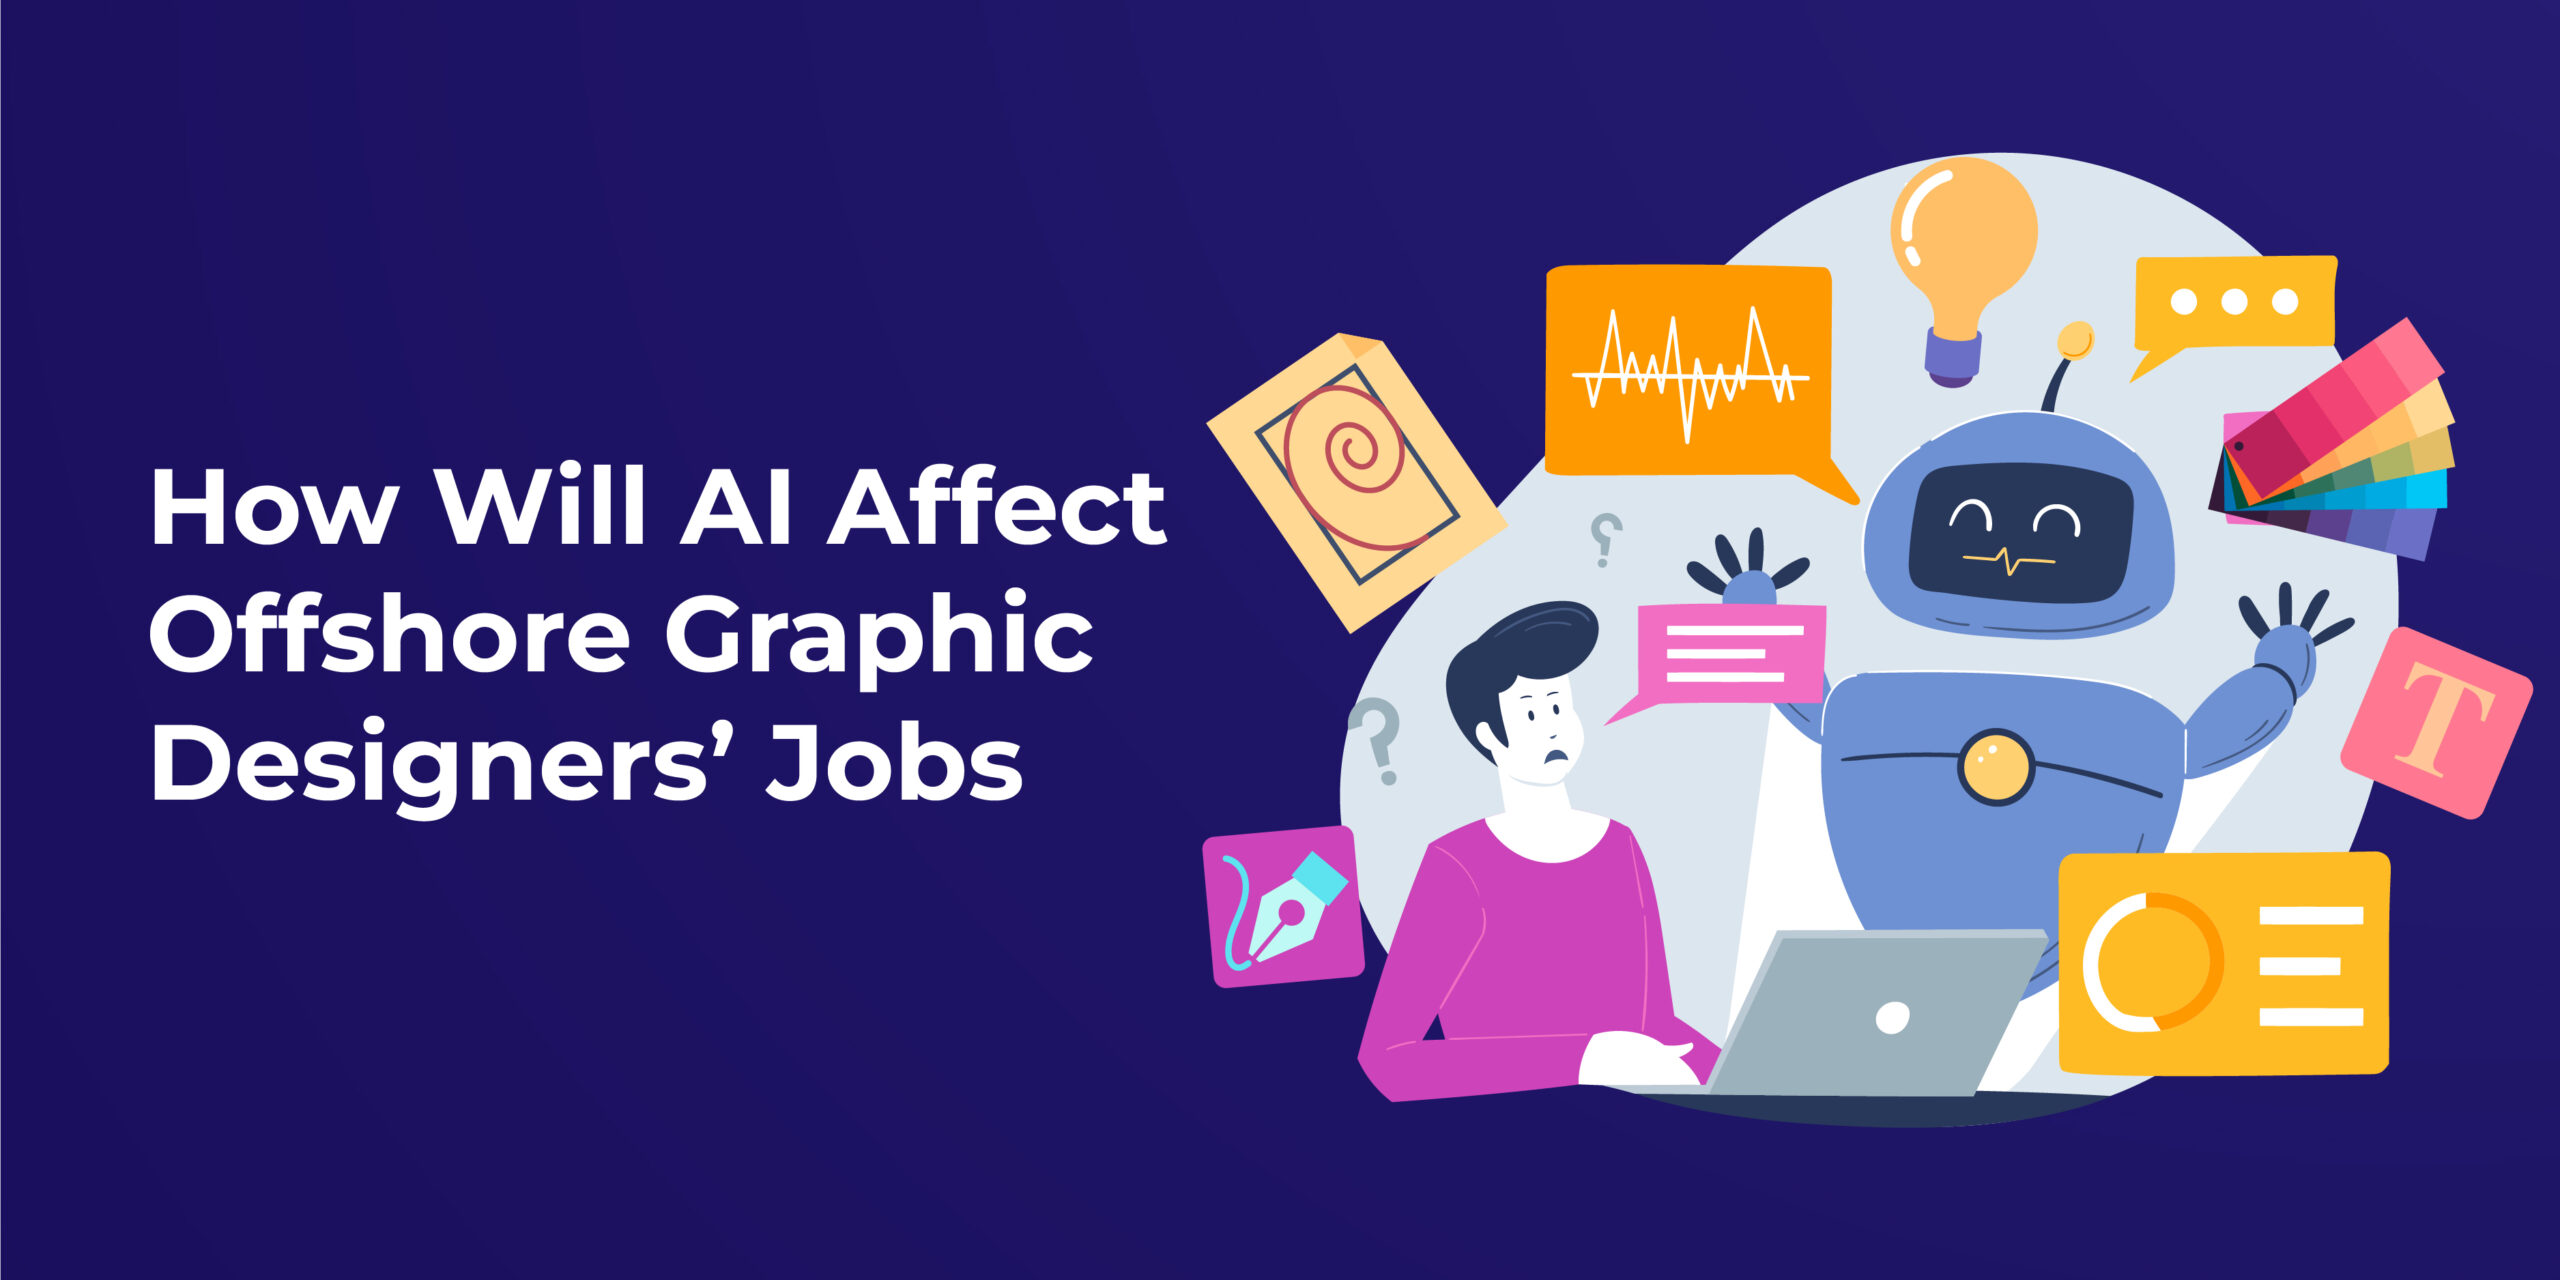 How Will AI Affect Offshore Graphic Designers’ Jobs